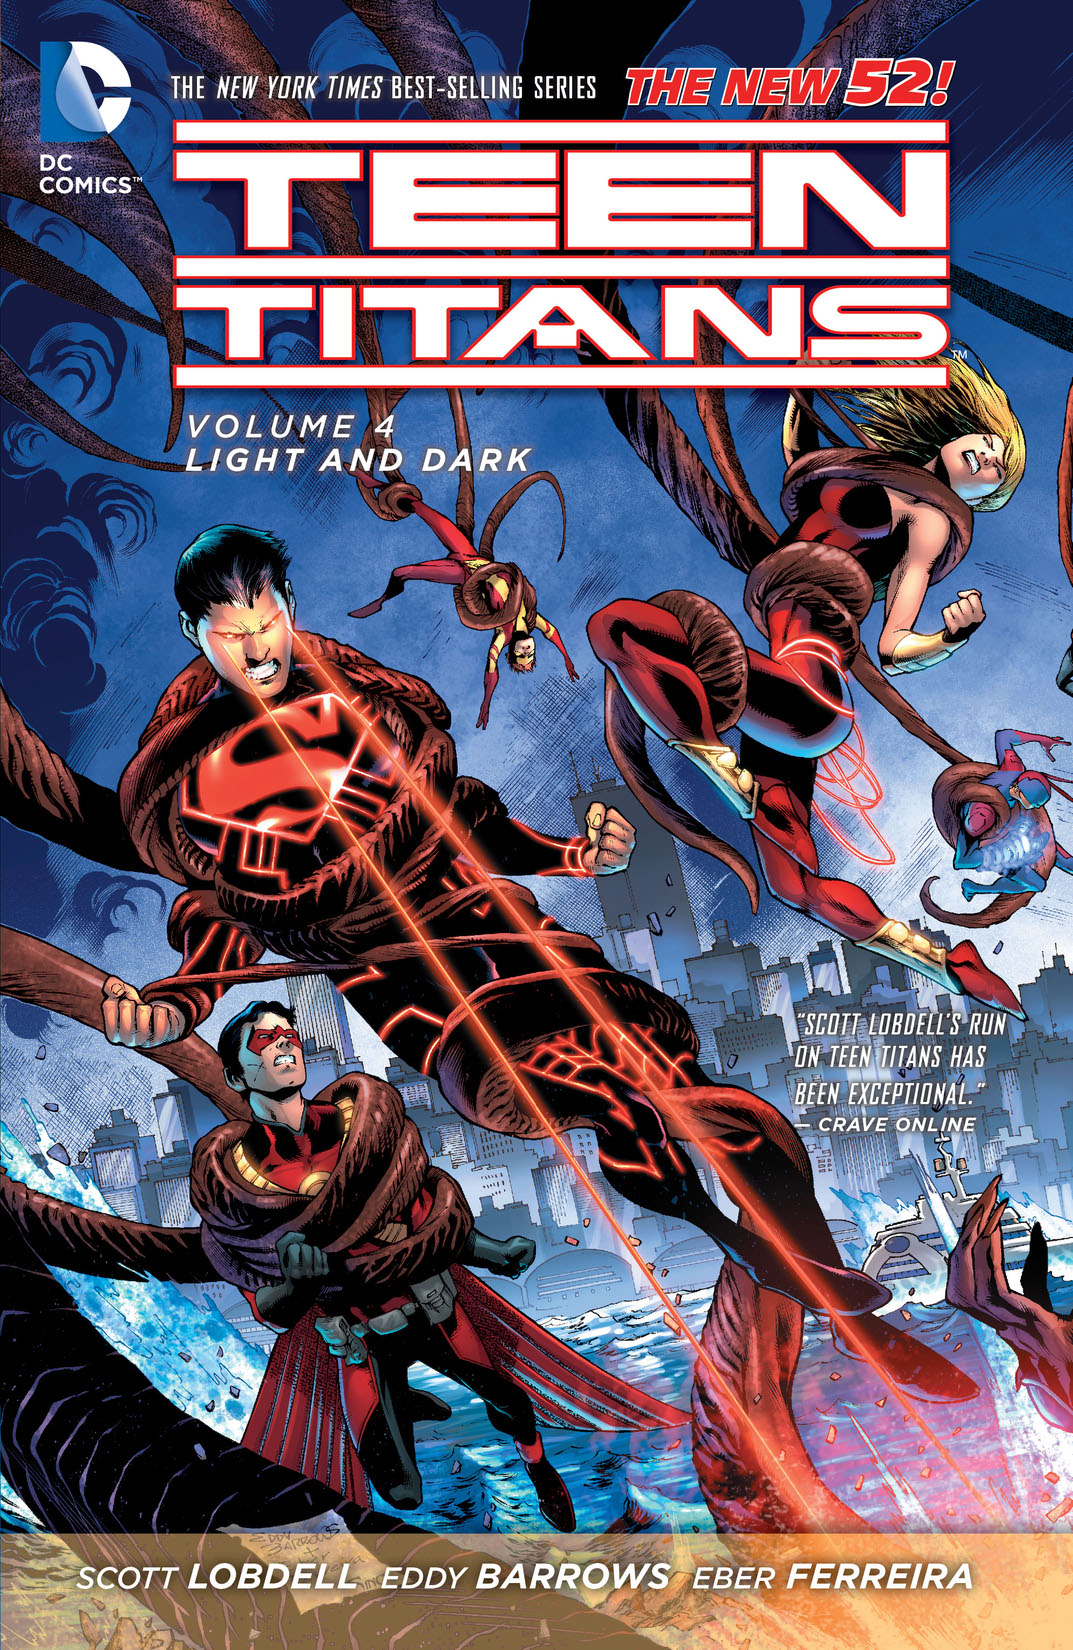 Teen Titans Vol. 4: Light and Dark preview images